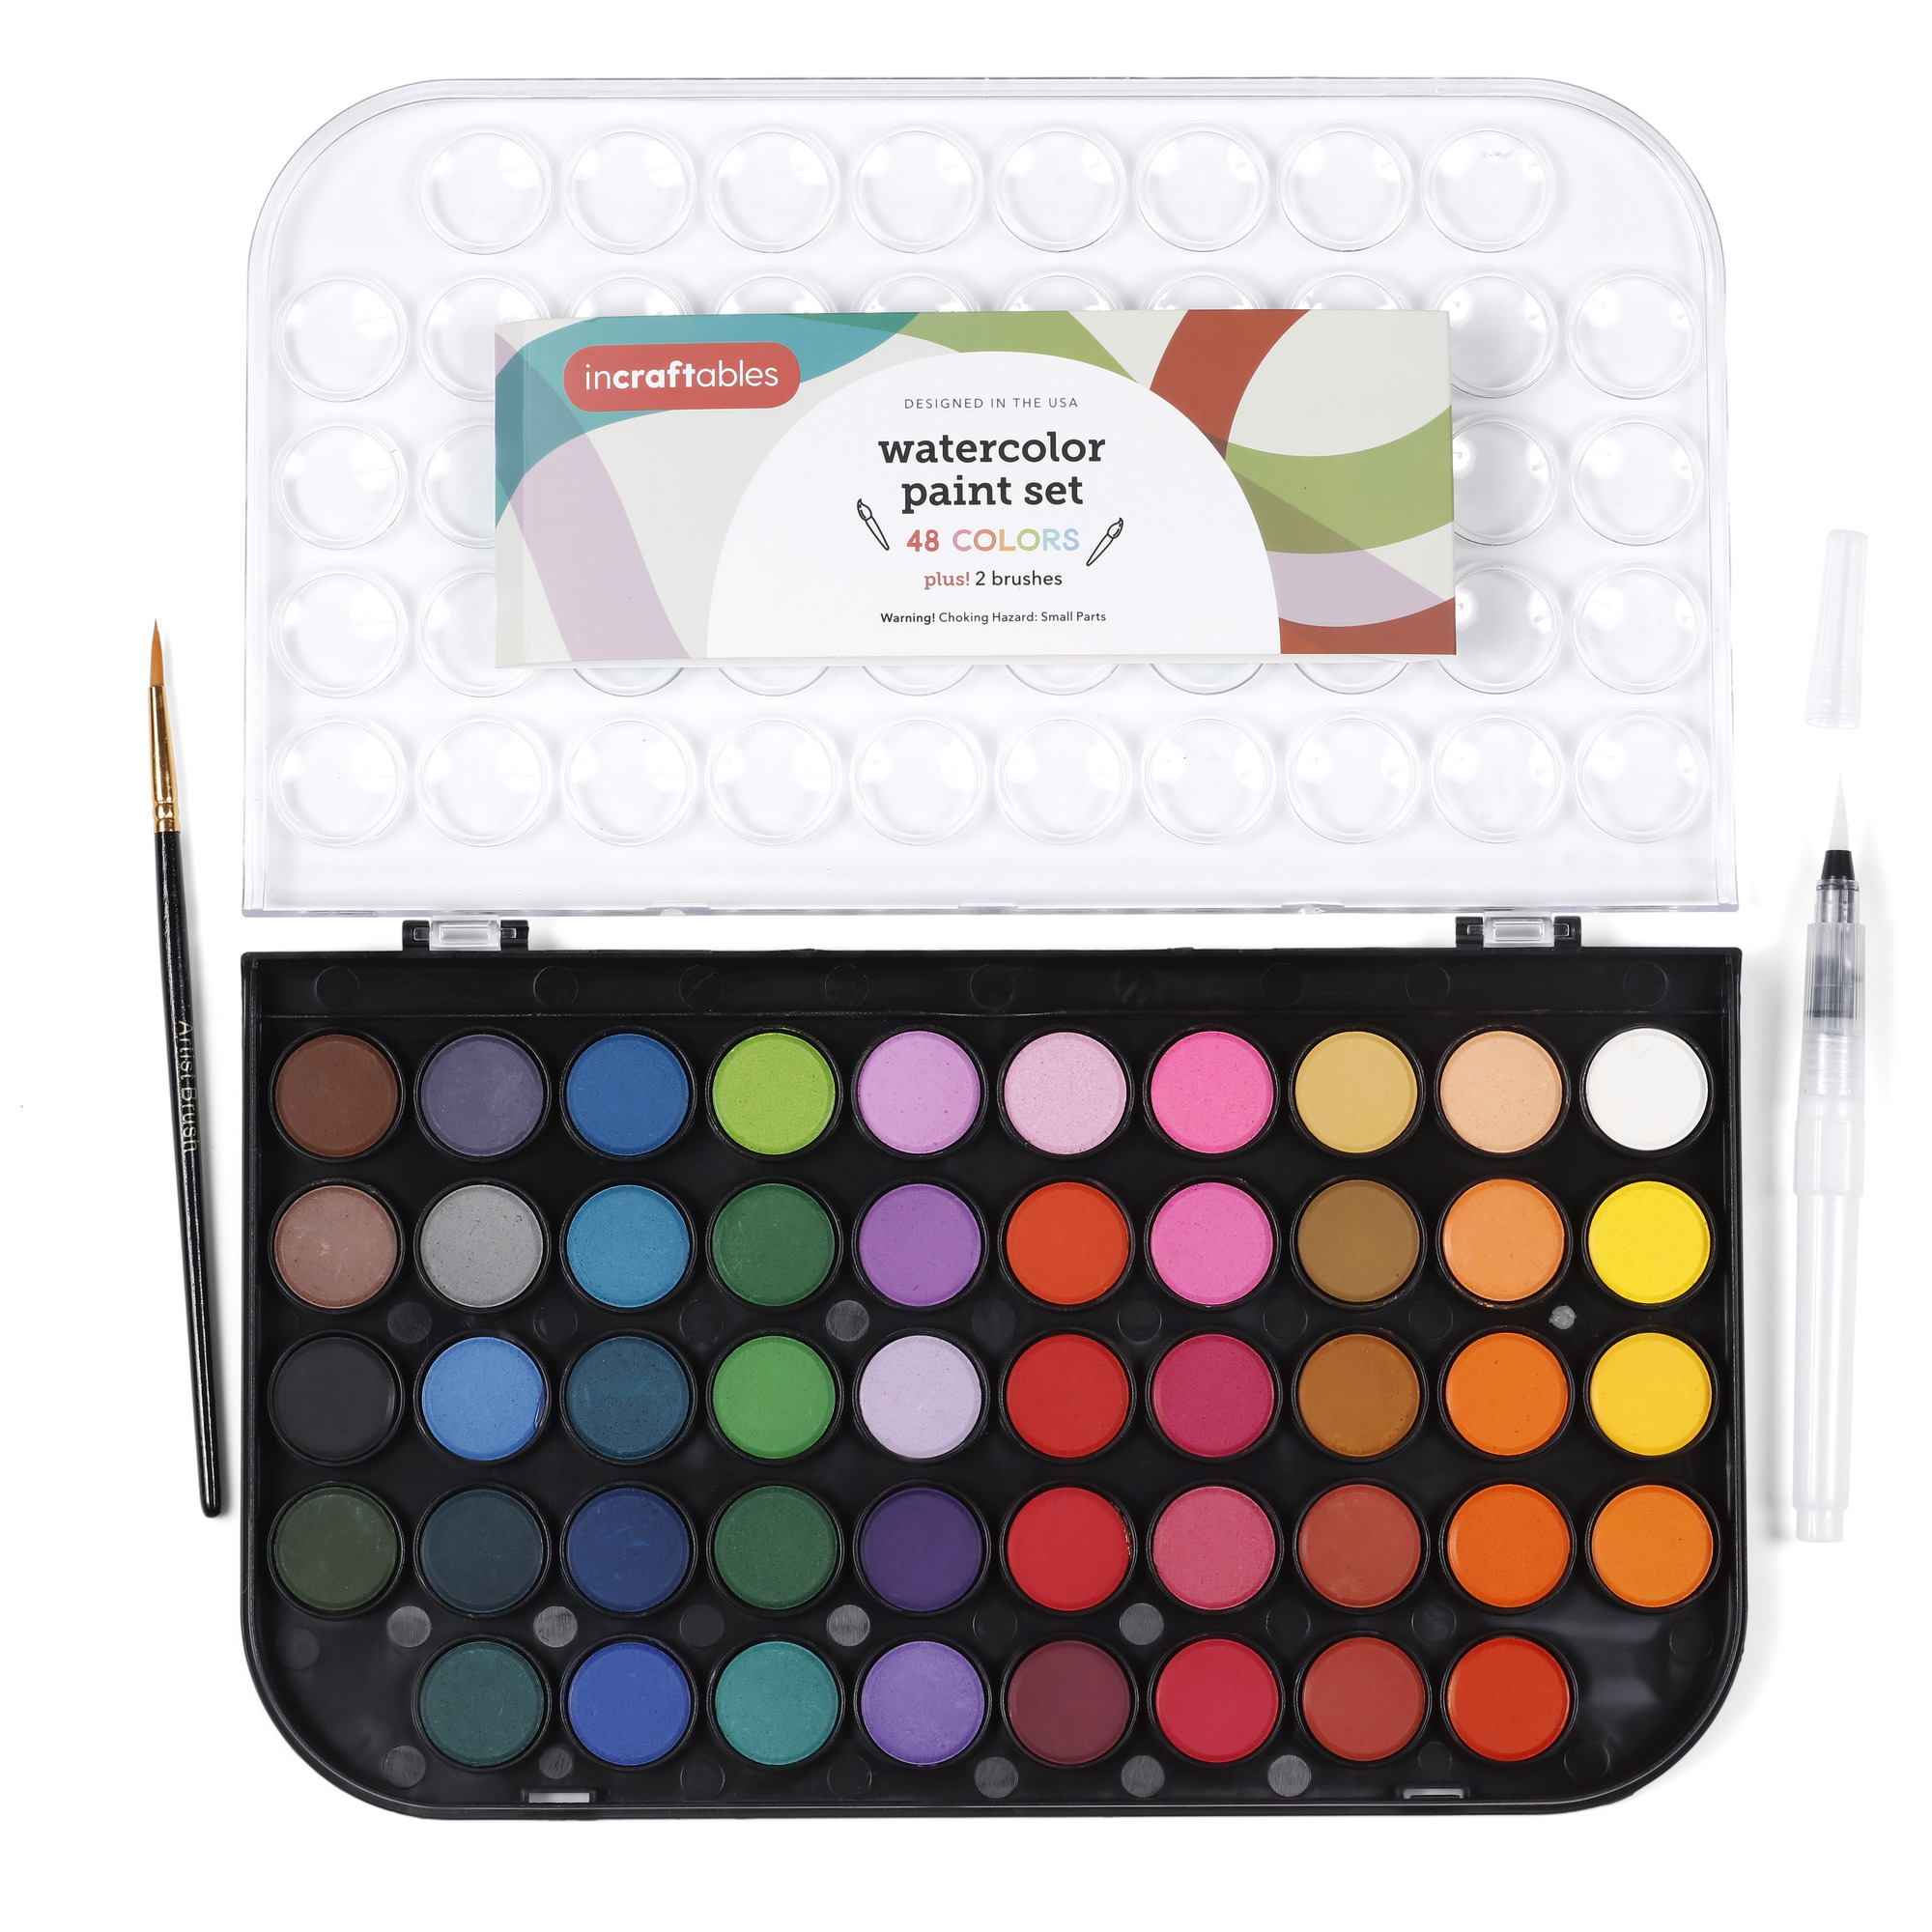 Incraftables Non-Toxic Watercolor Paint set (48 Colors). Water